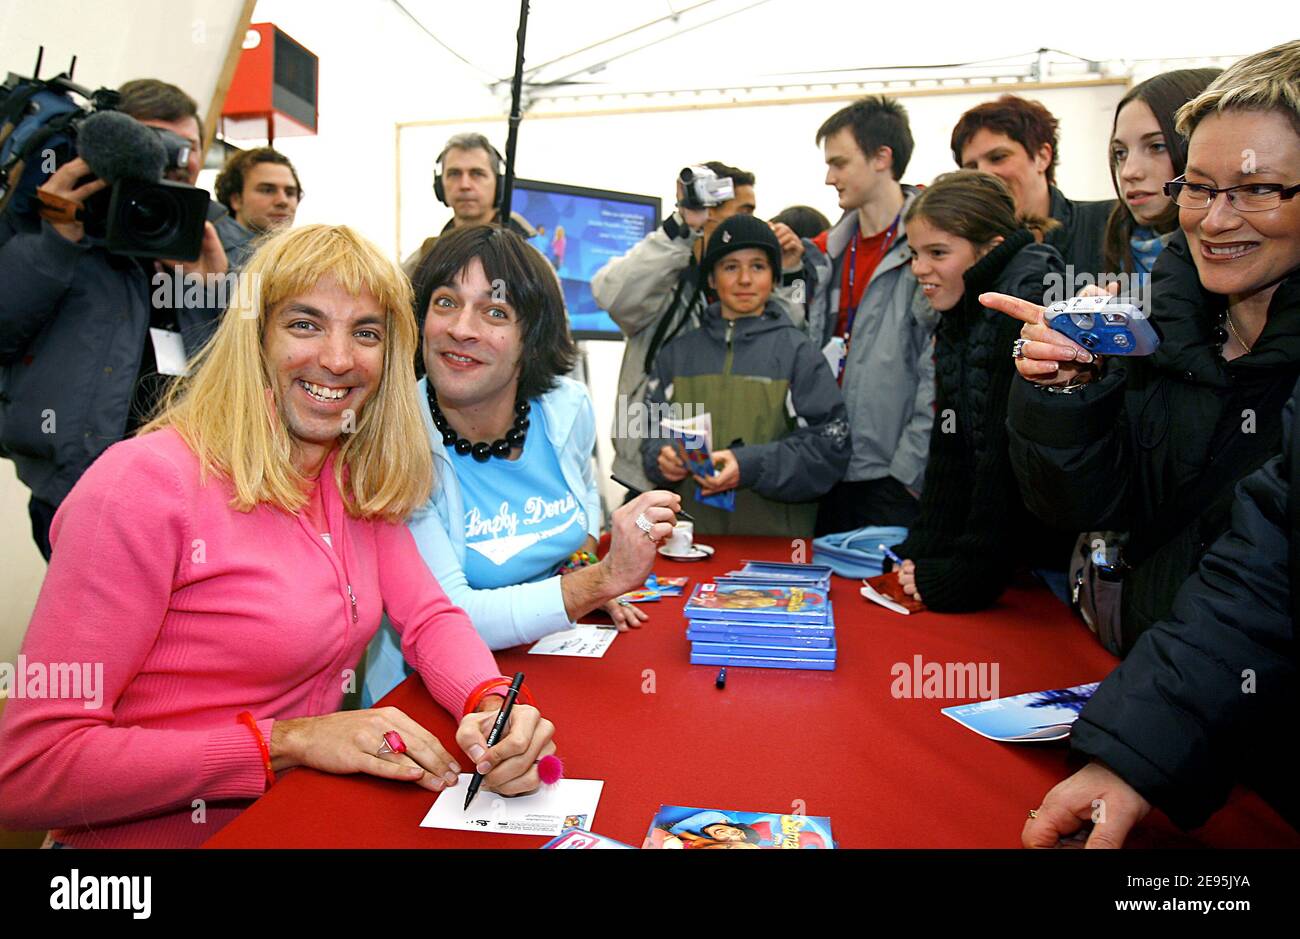 French humorists Doudi (aka David Strajmayster) (Blond hair or white shirt) and Pepess (aka Guillaume Carcaud) playing Samantha and Chantal in French TV show 'Samantha Oups' pose during the 8th International Television Film Festival of Luchon in French Pyrenees on February 1, 2006. Photo by Patrick Bernard/ABACAPRESS.COM Stock Photo